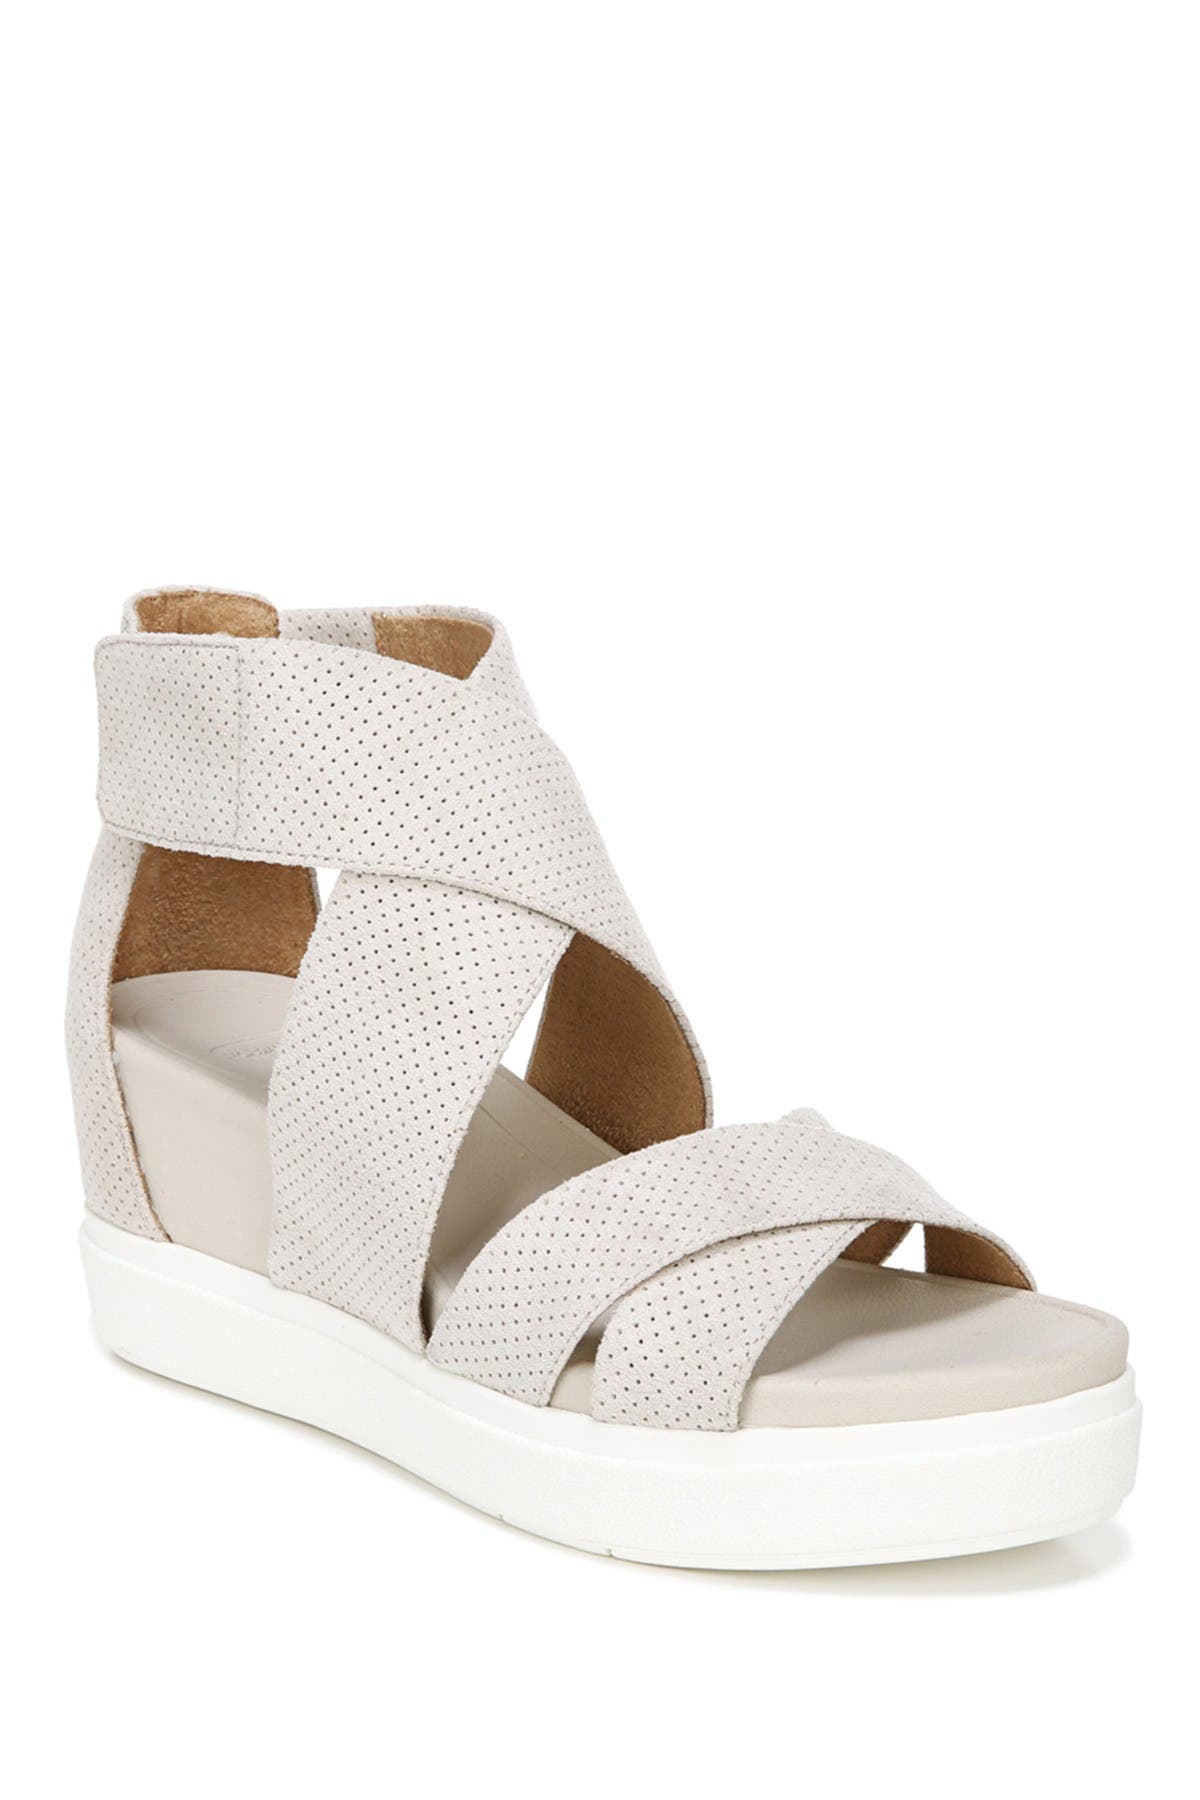 dr scholl's go for it wedge sandal